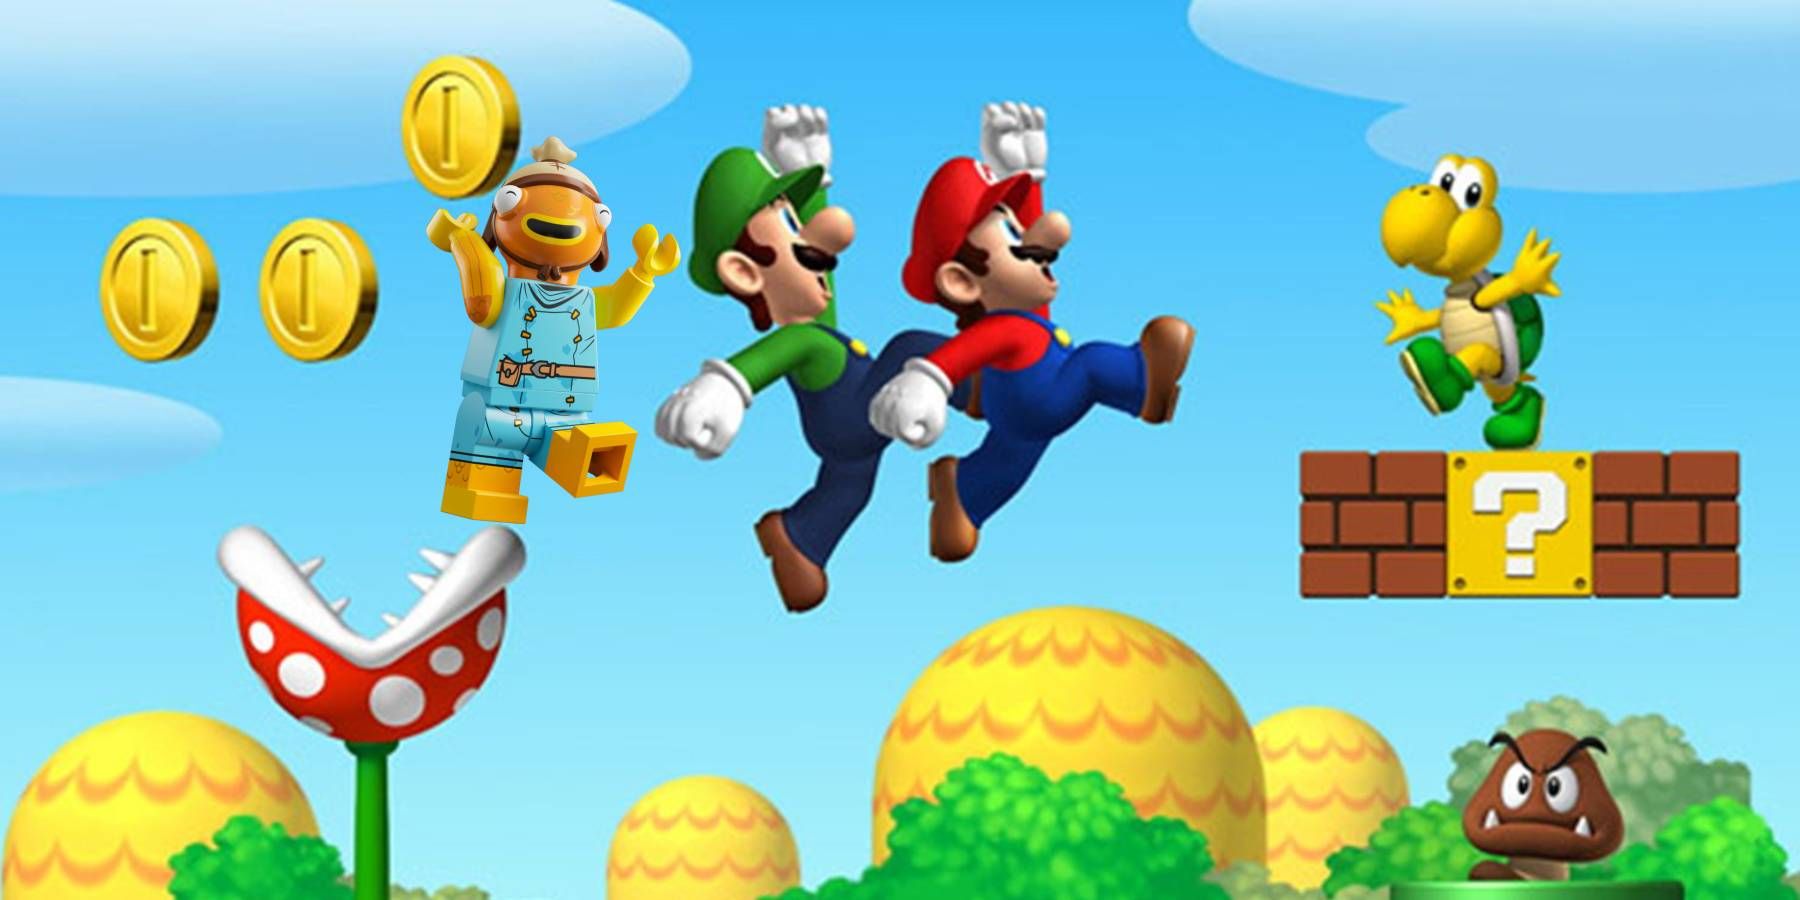 LEGO Fishstick from LEGO Fortnite jumping with Mario and Luigi in art from New Super Mario Bros.